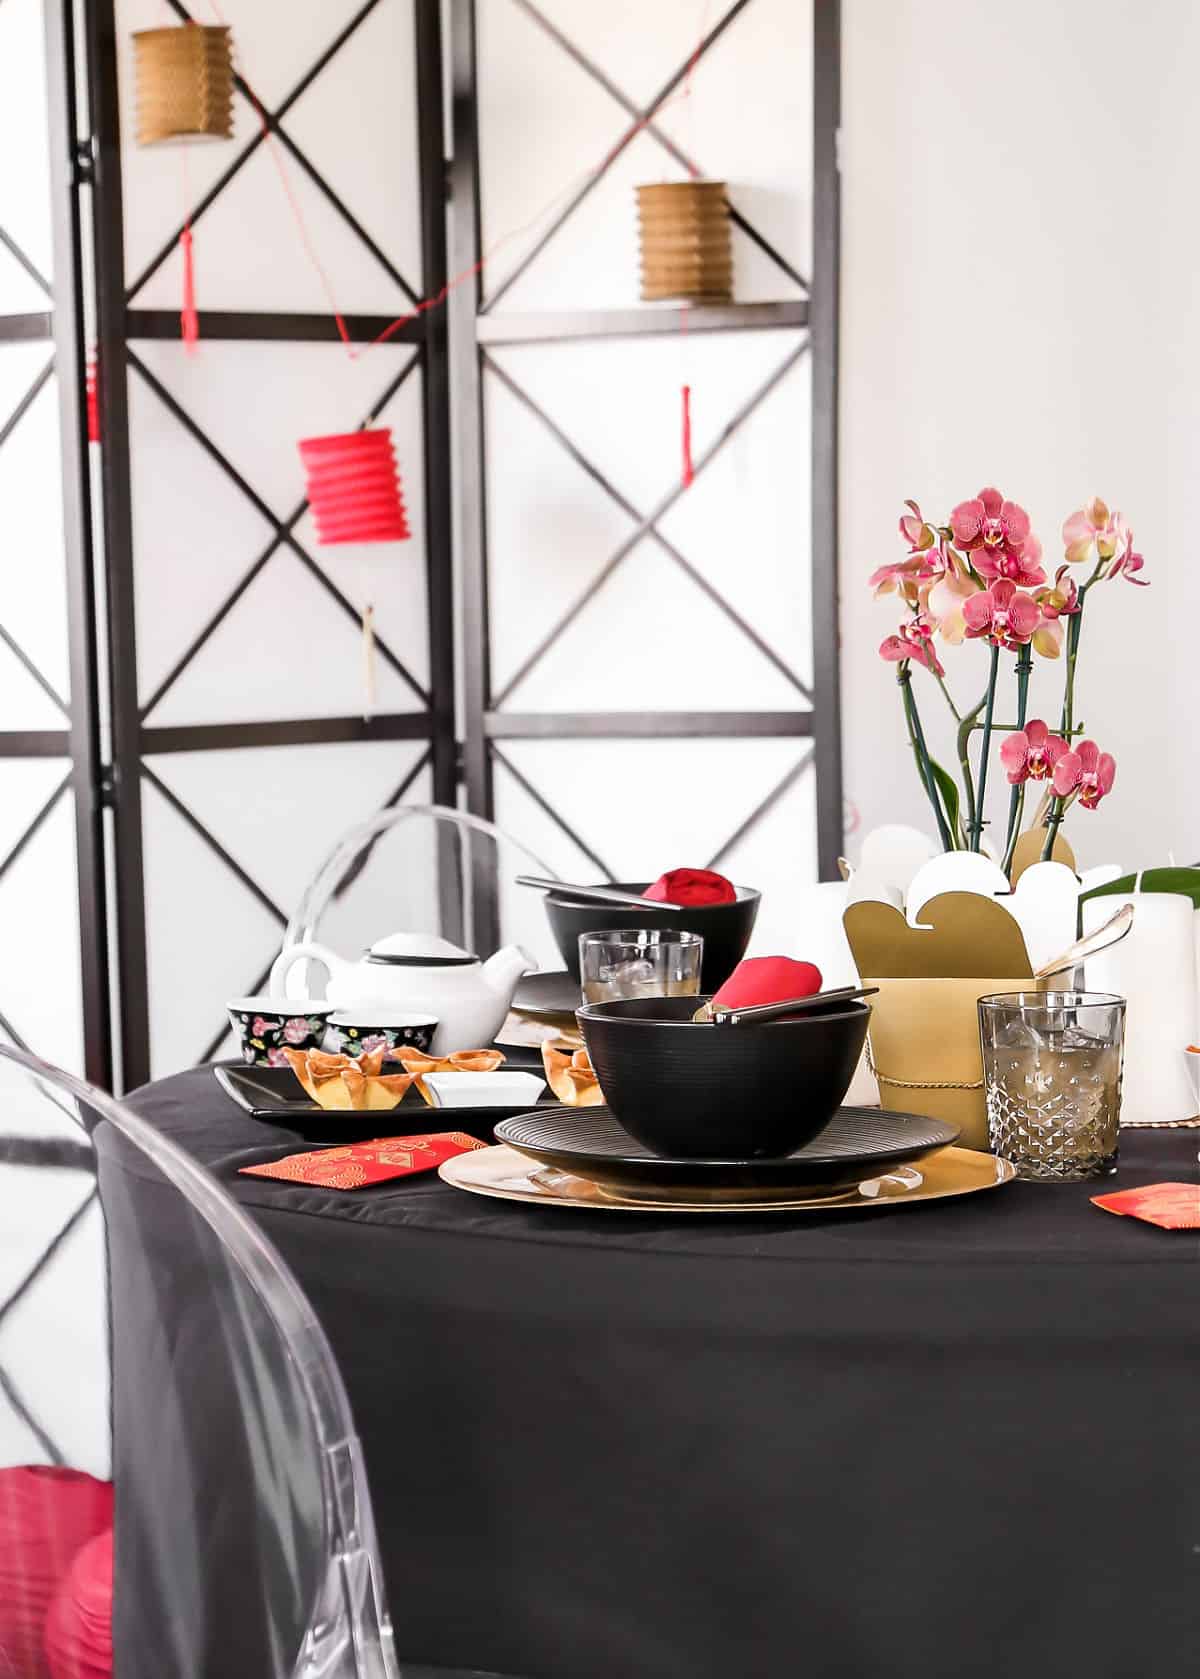 Chinese themed party decoration and tablescape in black, red, and gold